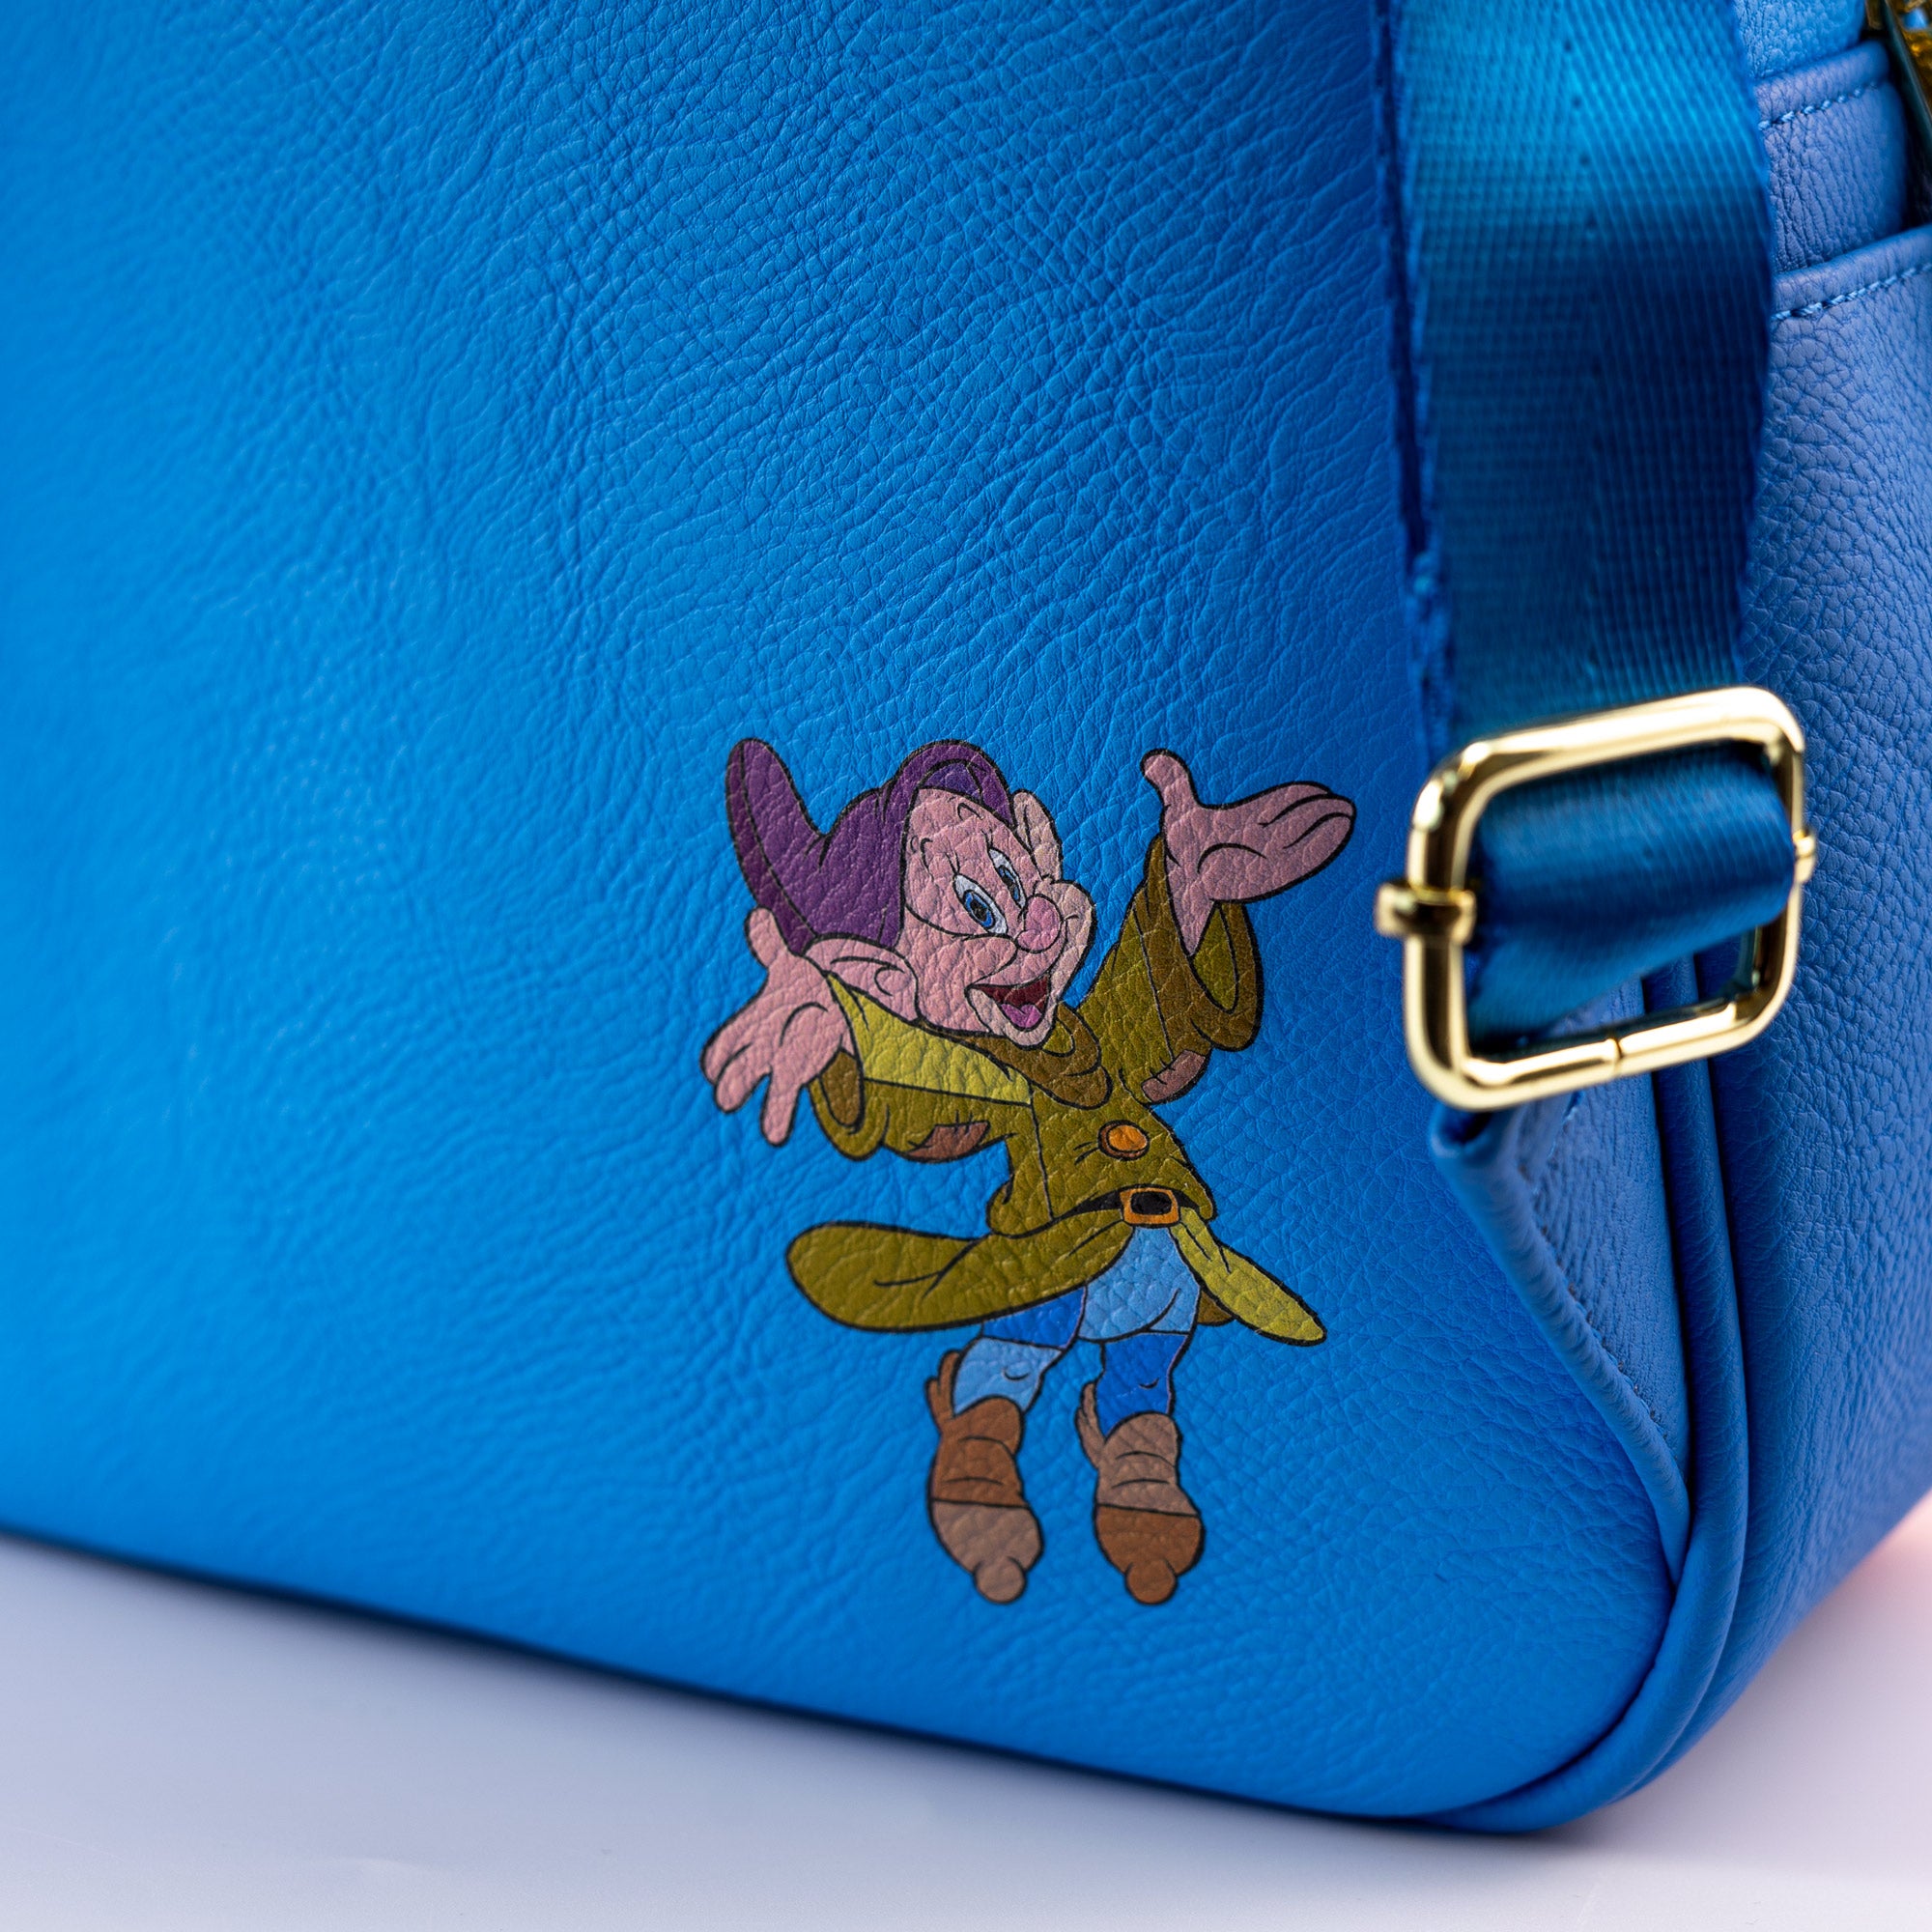 Loungefly x Disney Snow White Stained Glass Mini Backpack